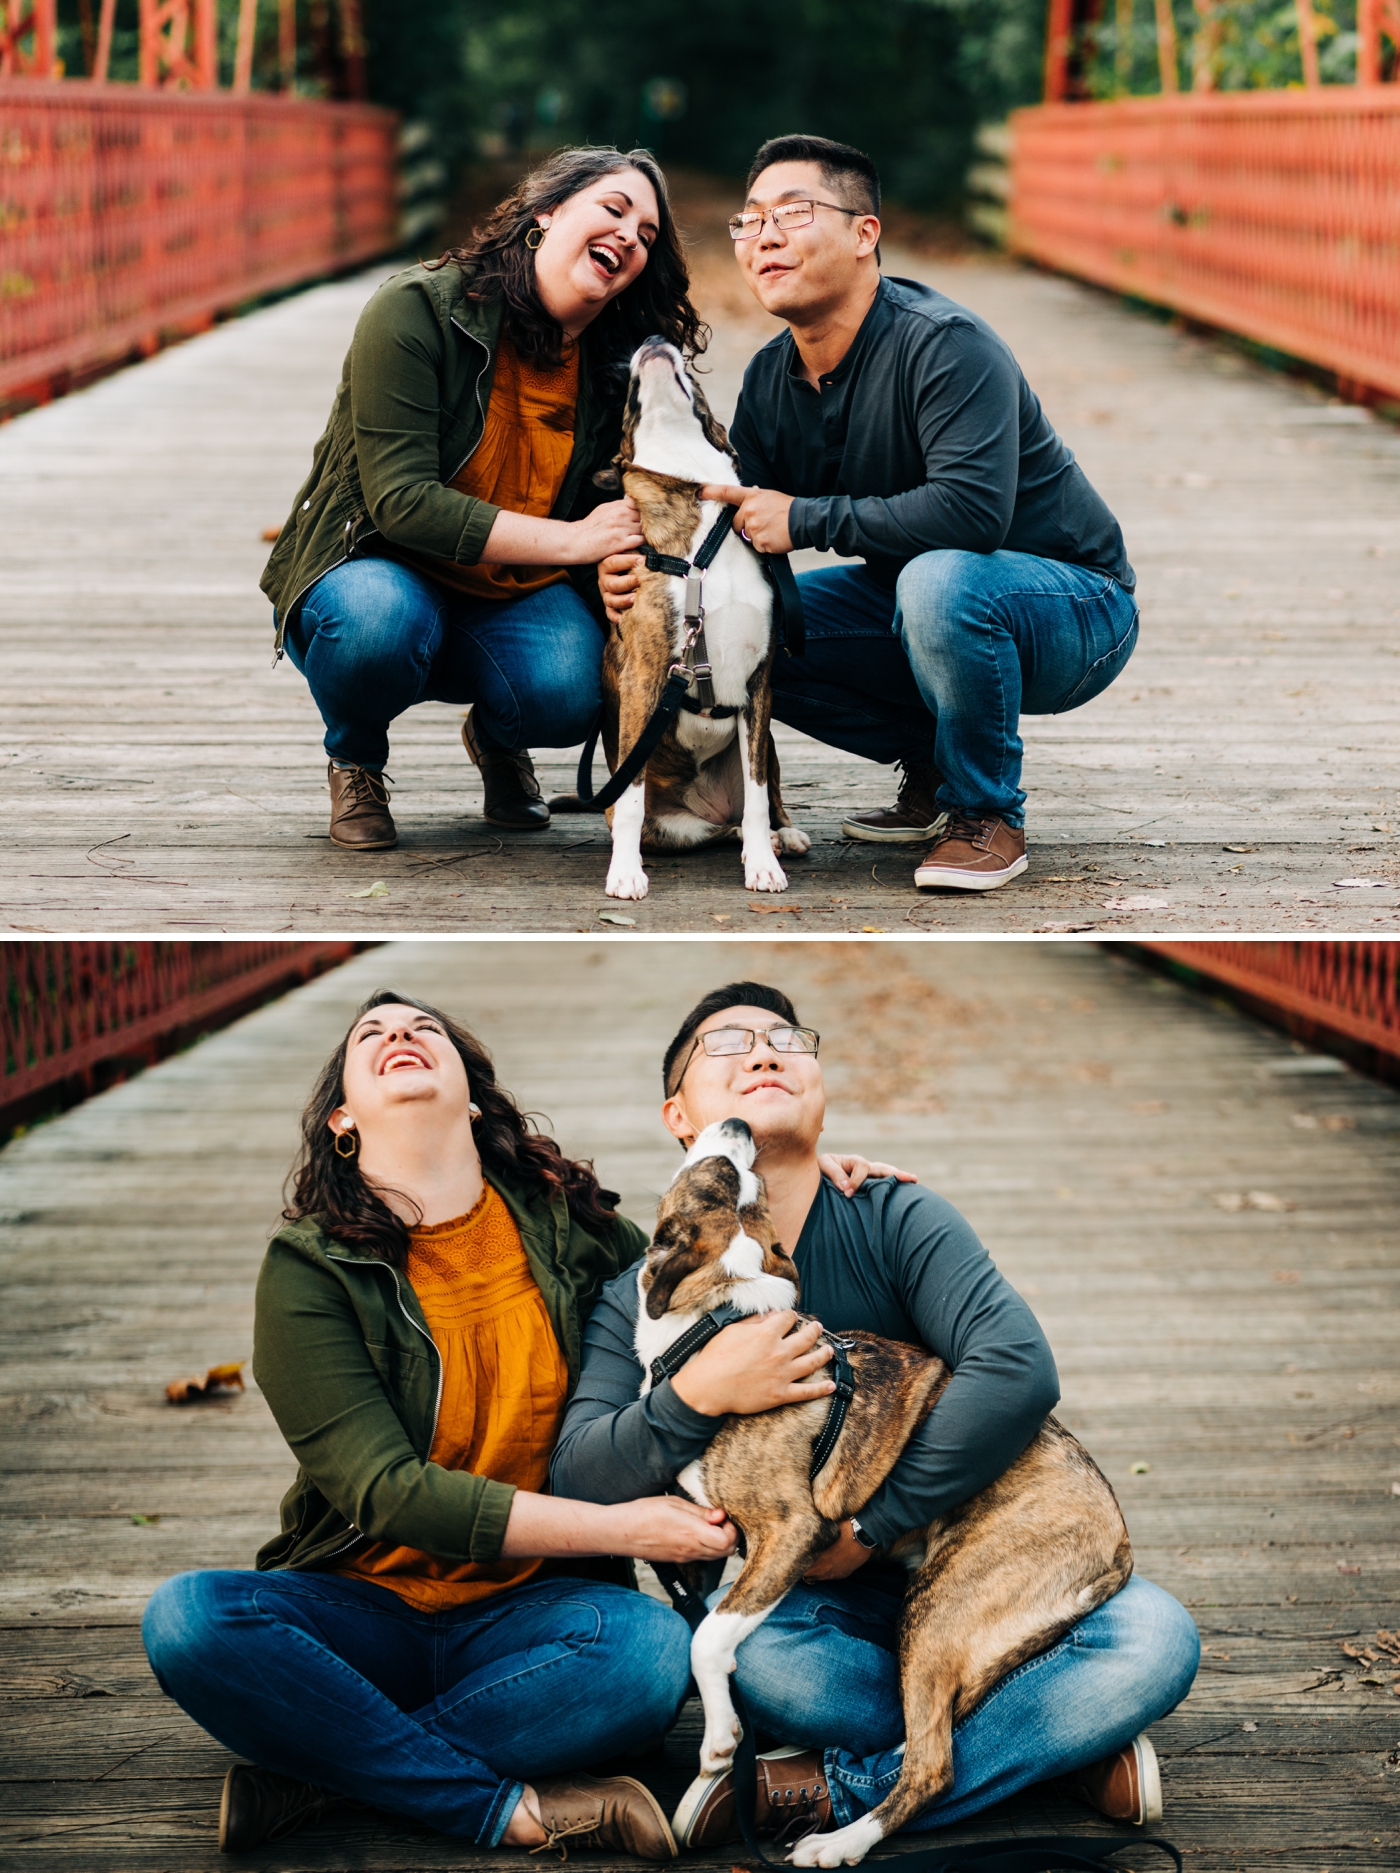 Photoshoot with your dog